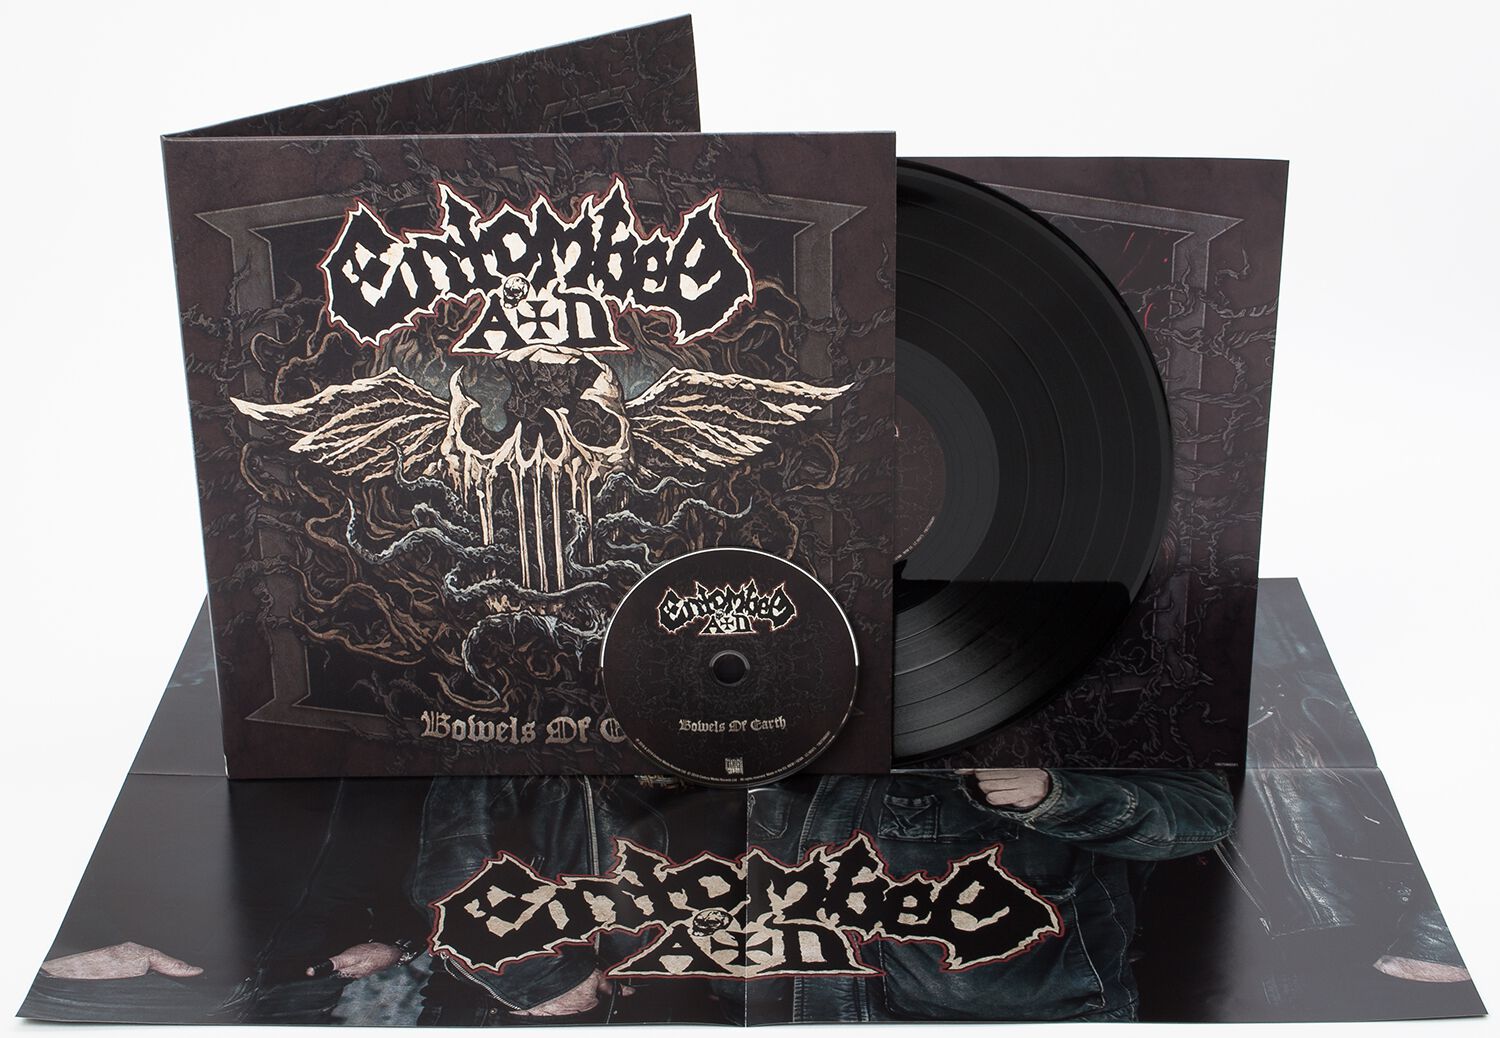 Image of Entombed A.D. Bowels of earth LP & CD Standard